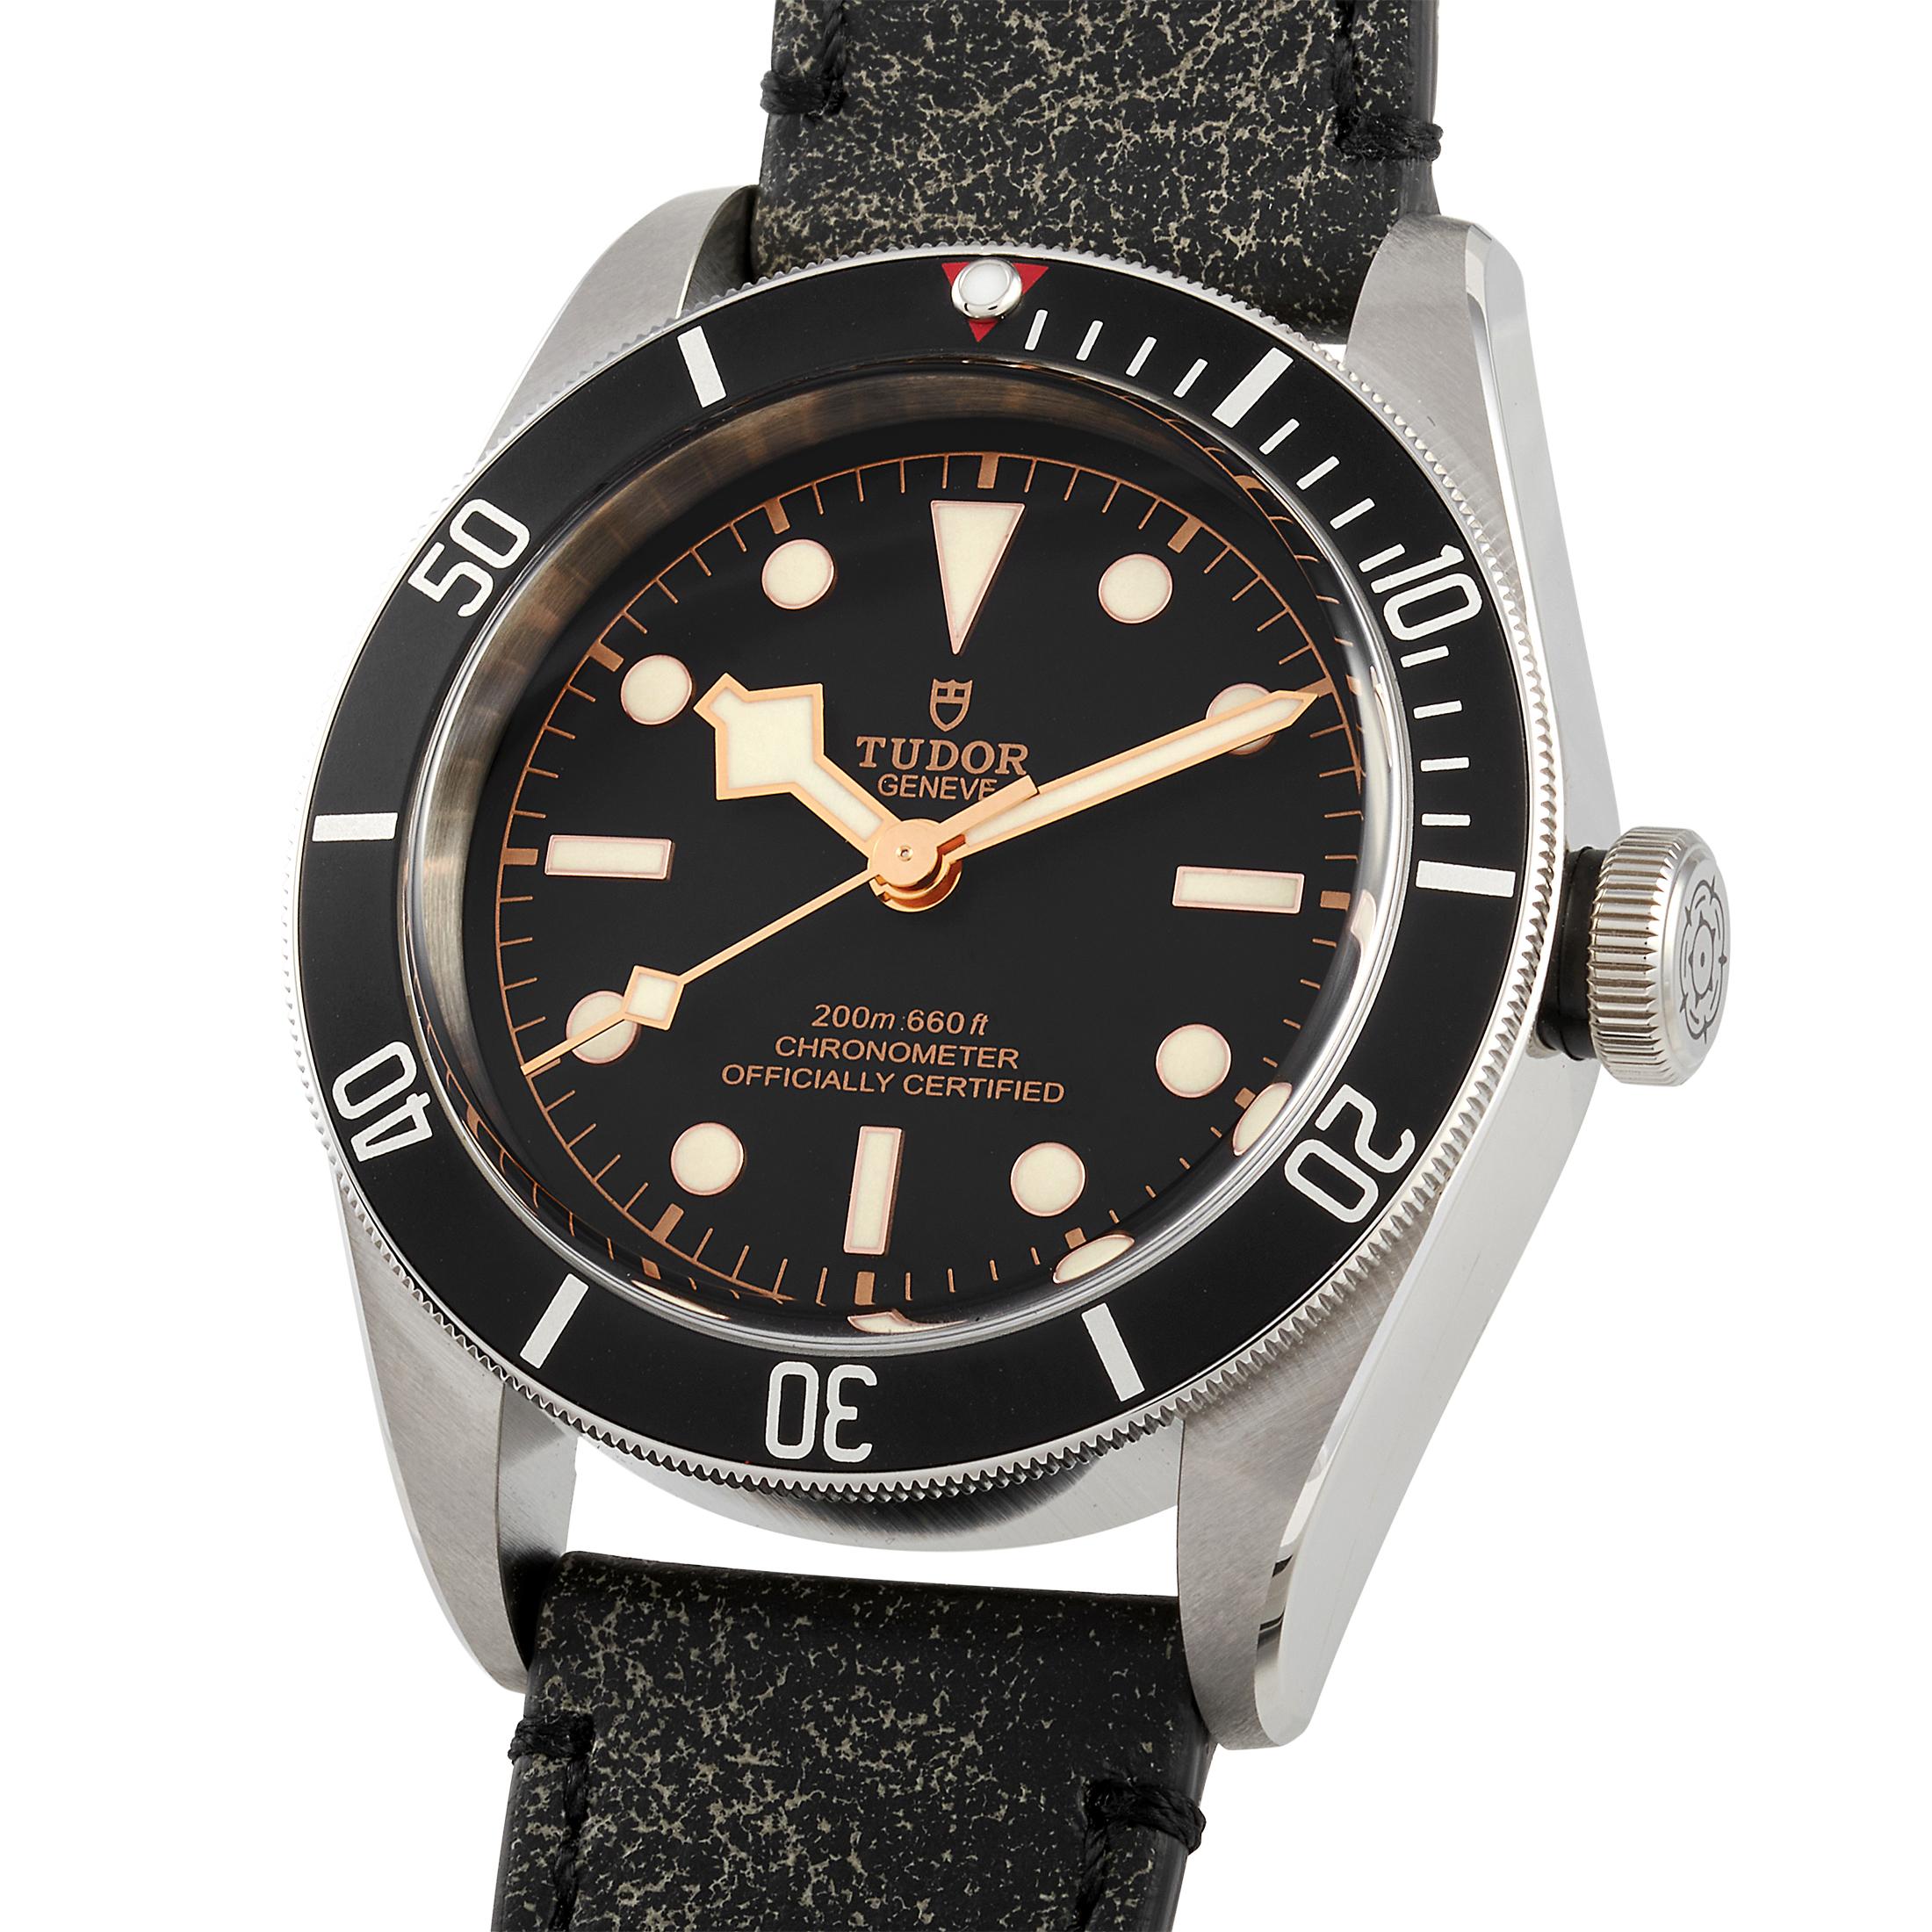 Designed with masculine refinement, the Tudor Heritage Black Bay Men's Leather Watch 79230N is a favorite among many Tudor enthusiasts. This handsome timepiece features a 41mm polished and satin-finished stainless steel case and a stunning black